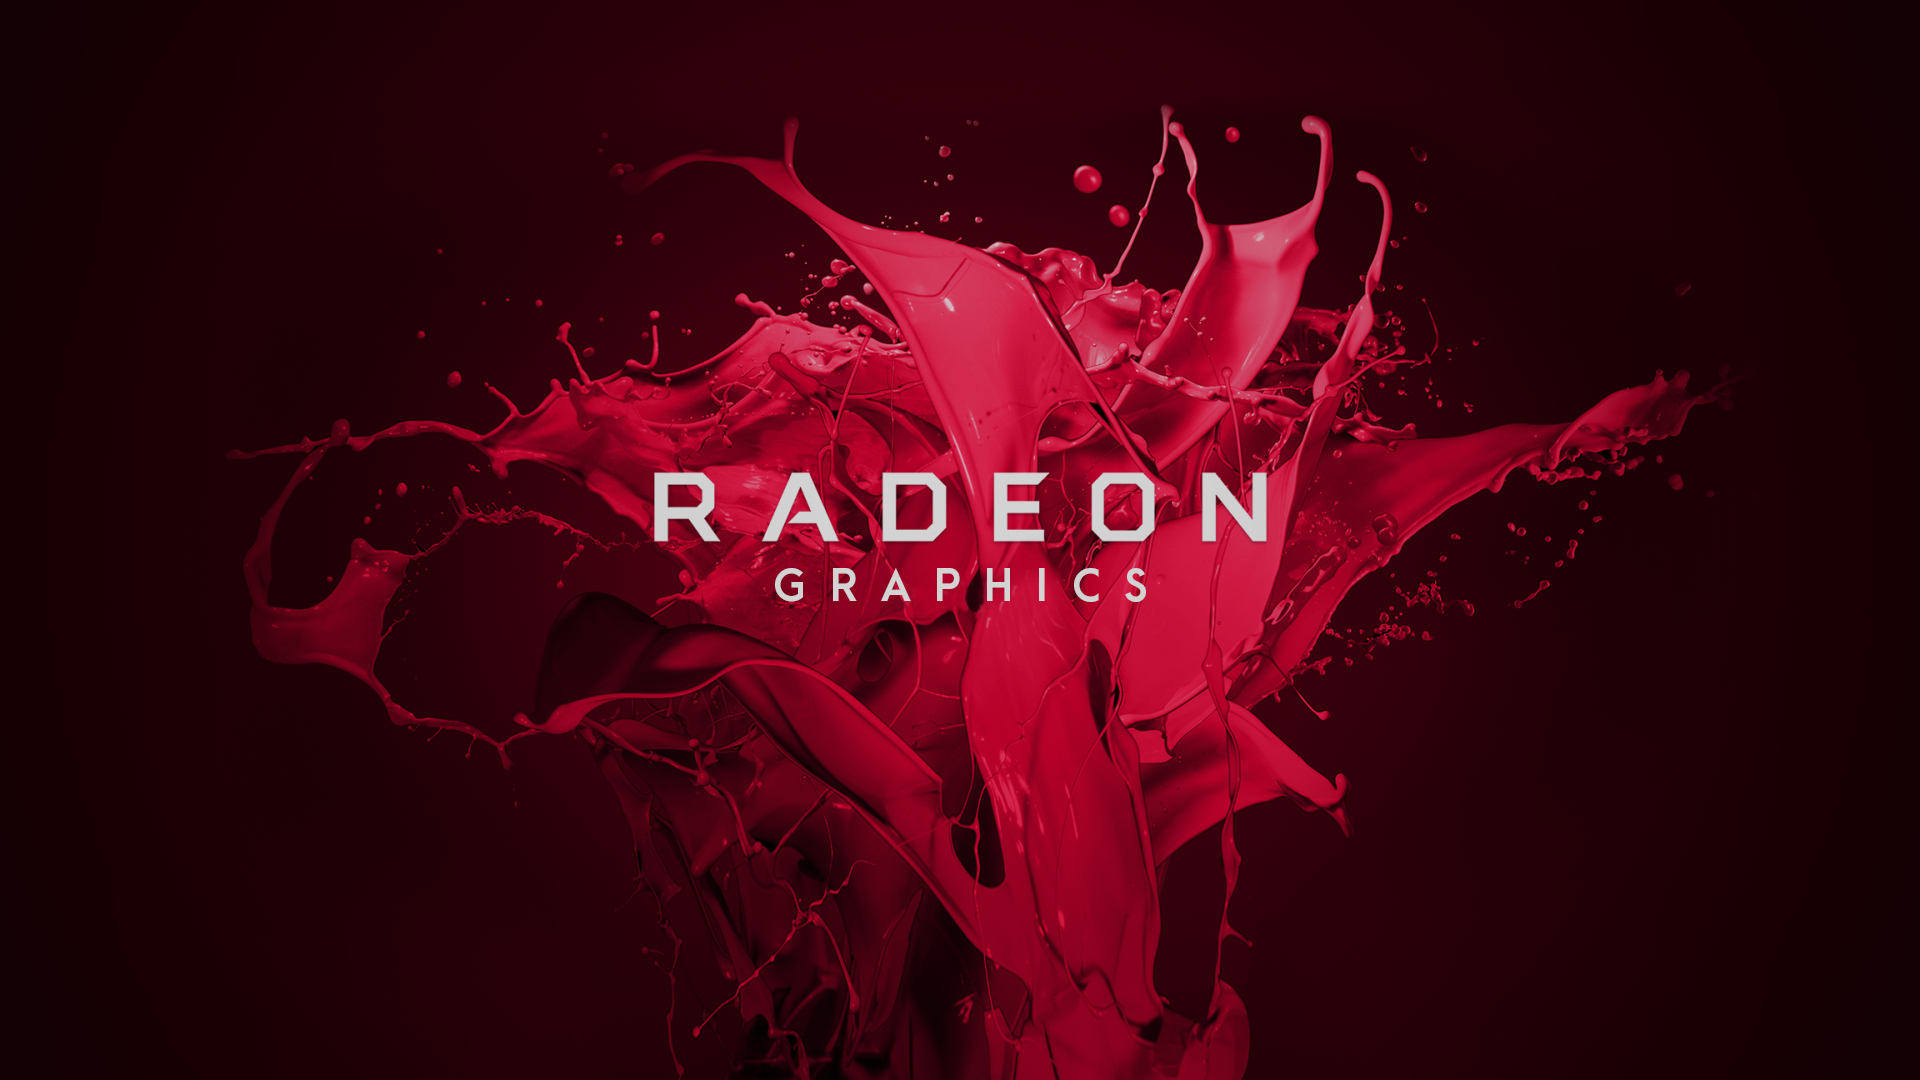 Amd Radeon Graphic Wallpaper Hd Hi Tech 4k Wallpapers Images Photos And Background